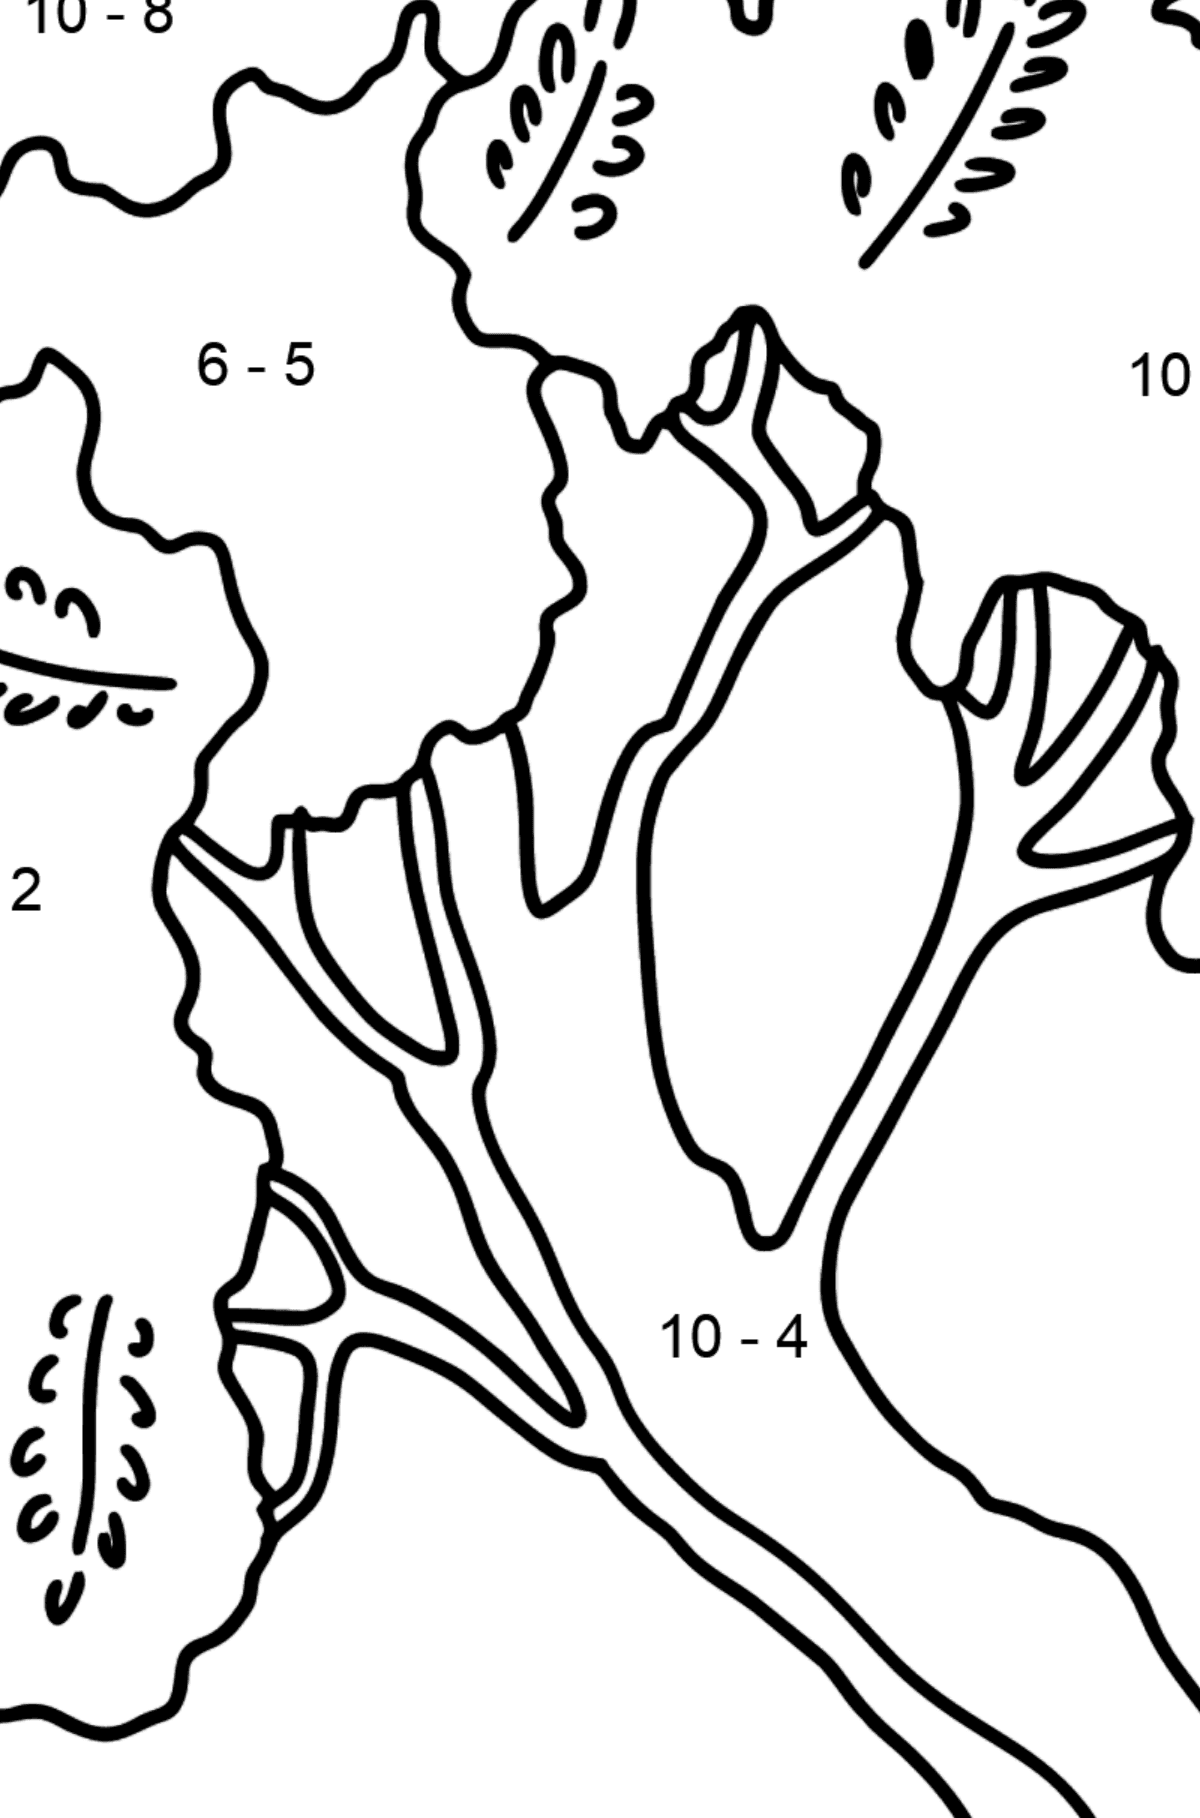 Acacia coloring page - Math Coloring - Subtraction for Kids